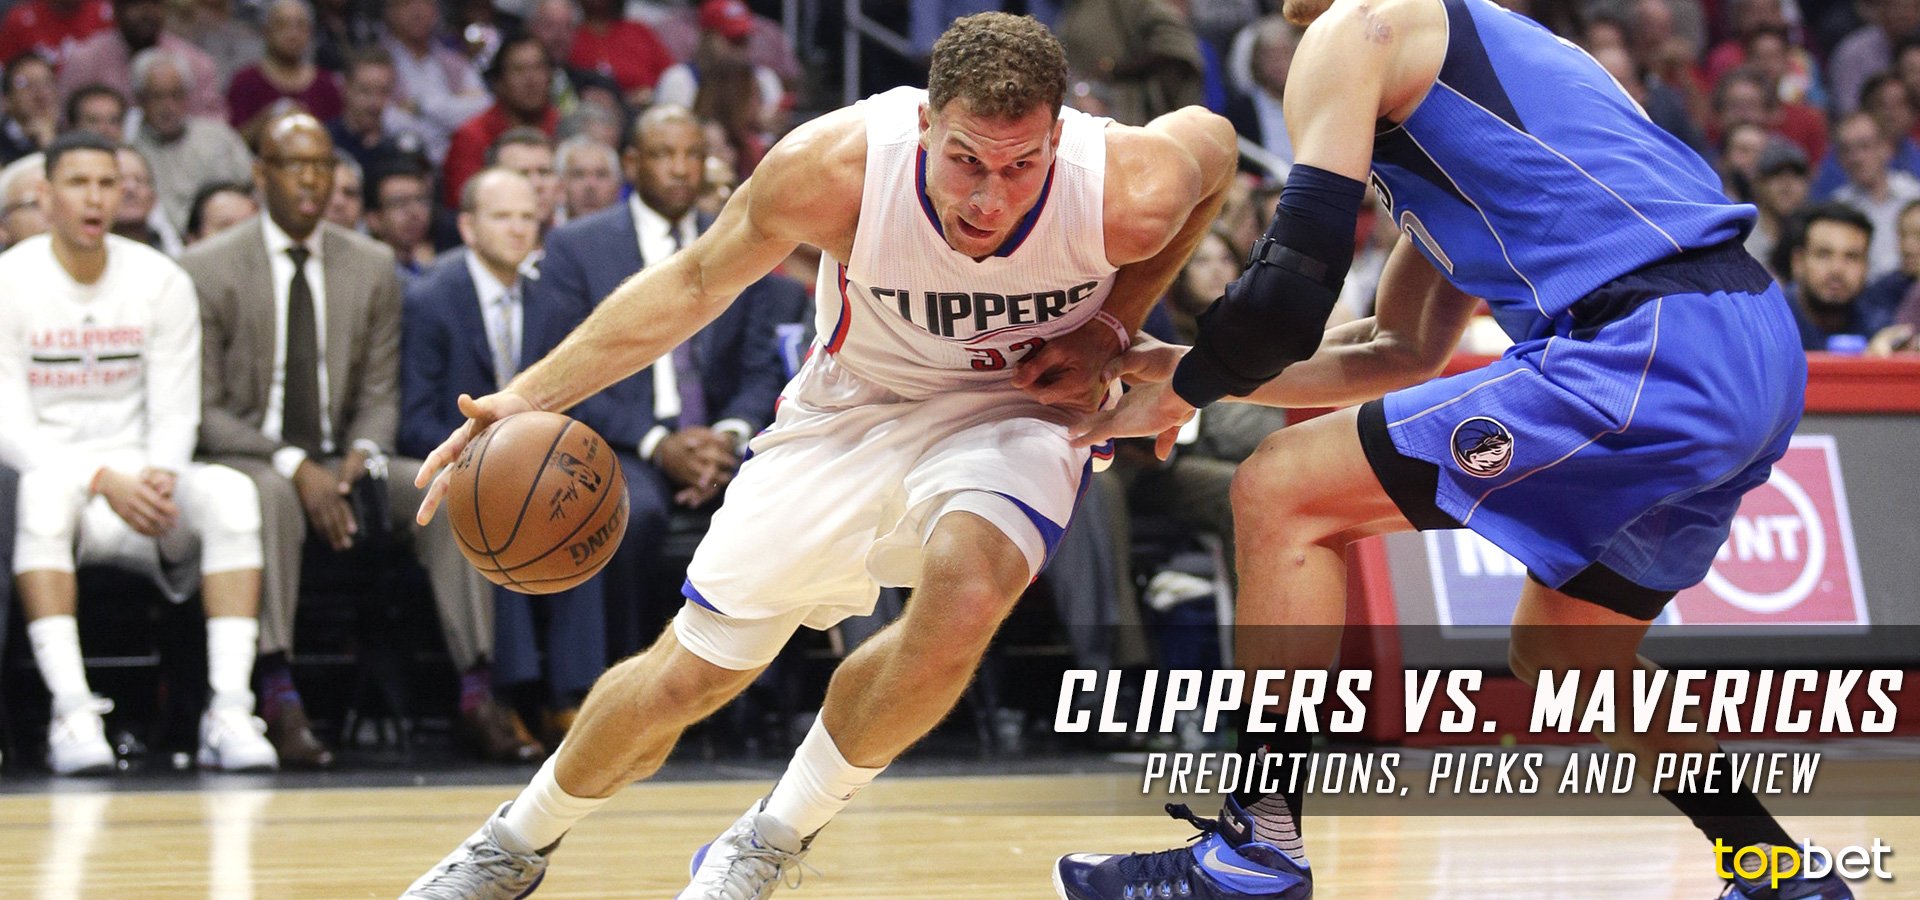 Clippers vs Mavs Predictions, Picks and Preview – March 20171920 x 900